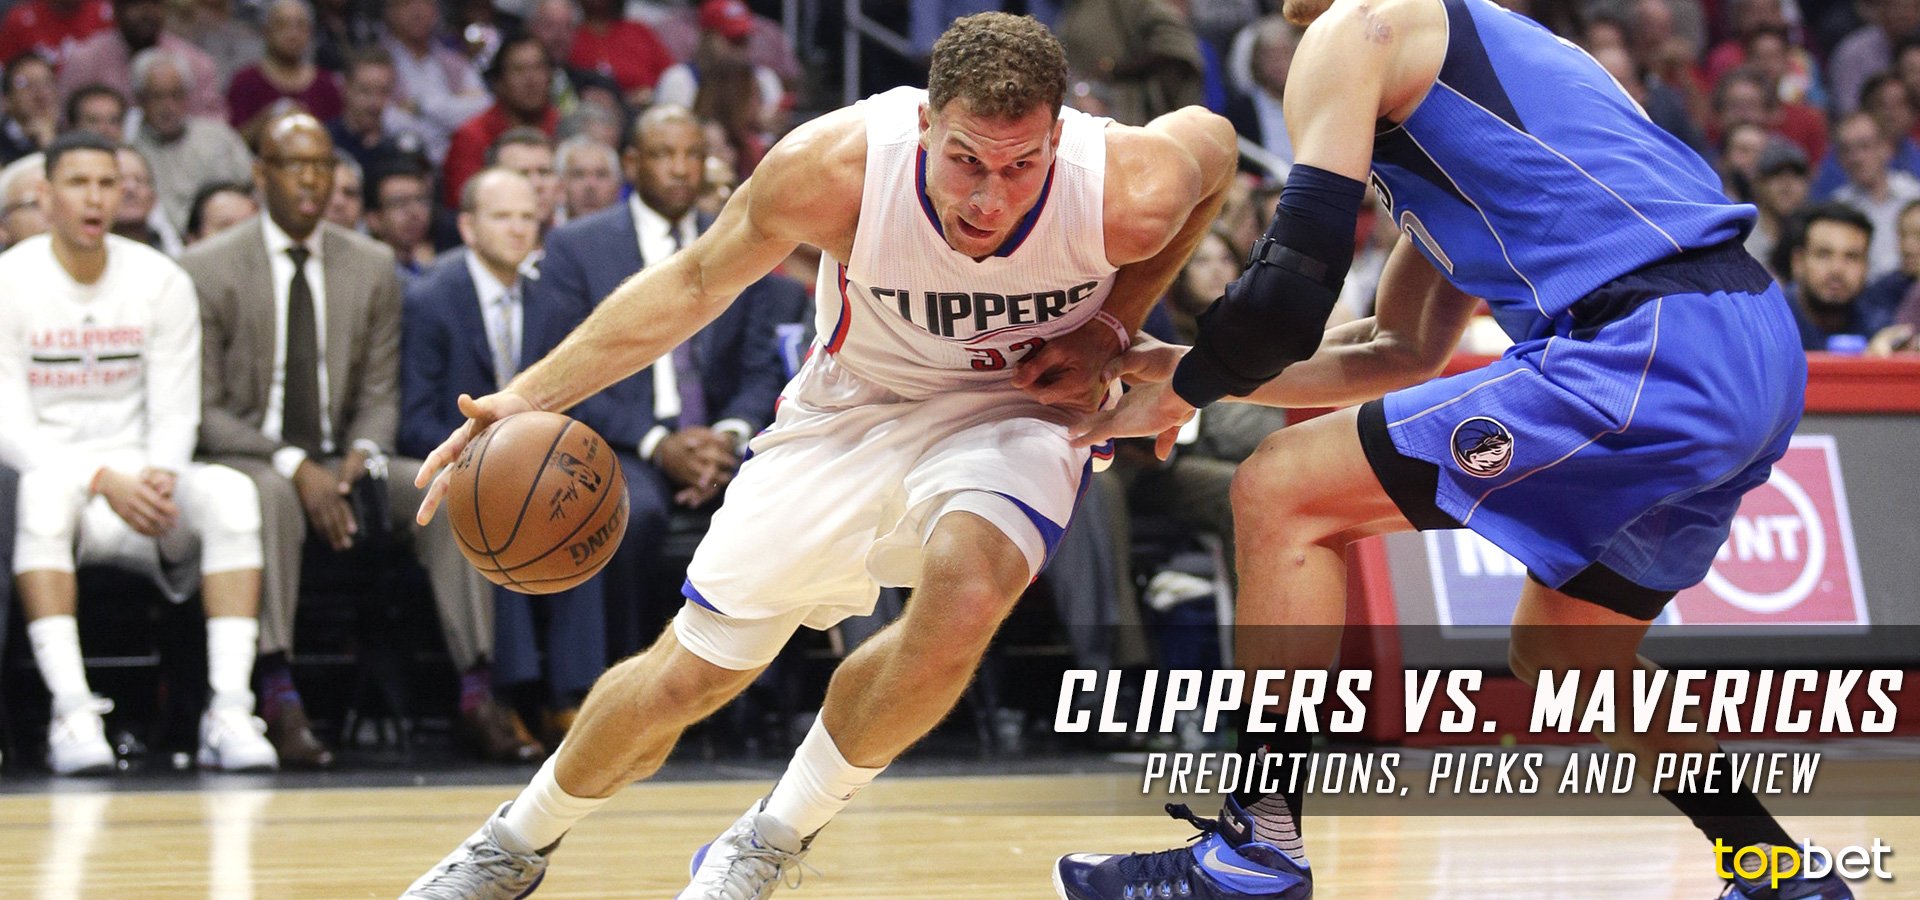 Clippers vs Mavs Predictions, Picks and Preview – March 20171920 x 900